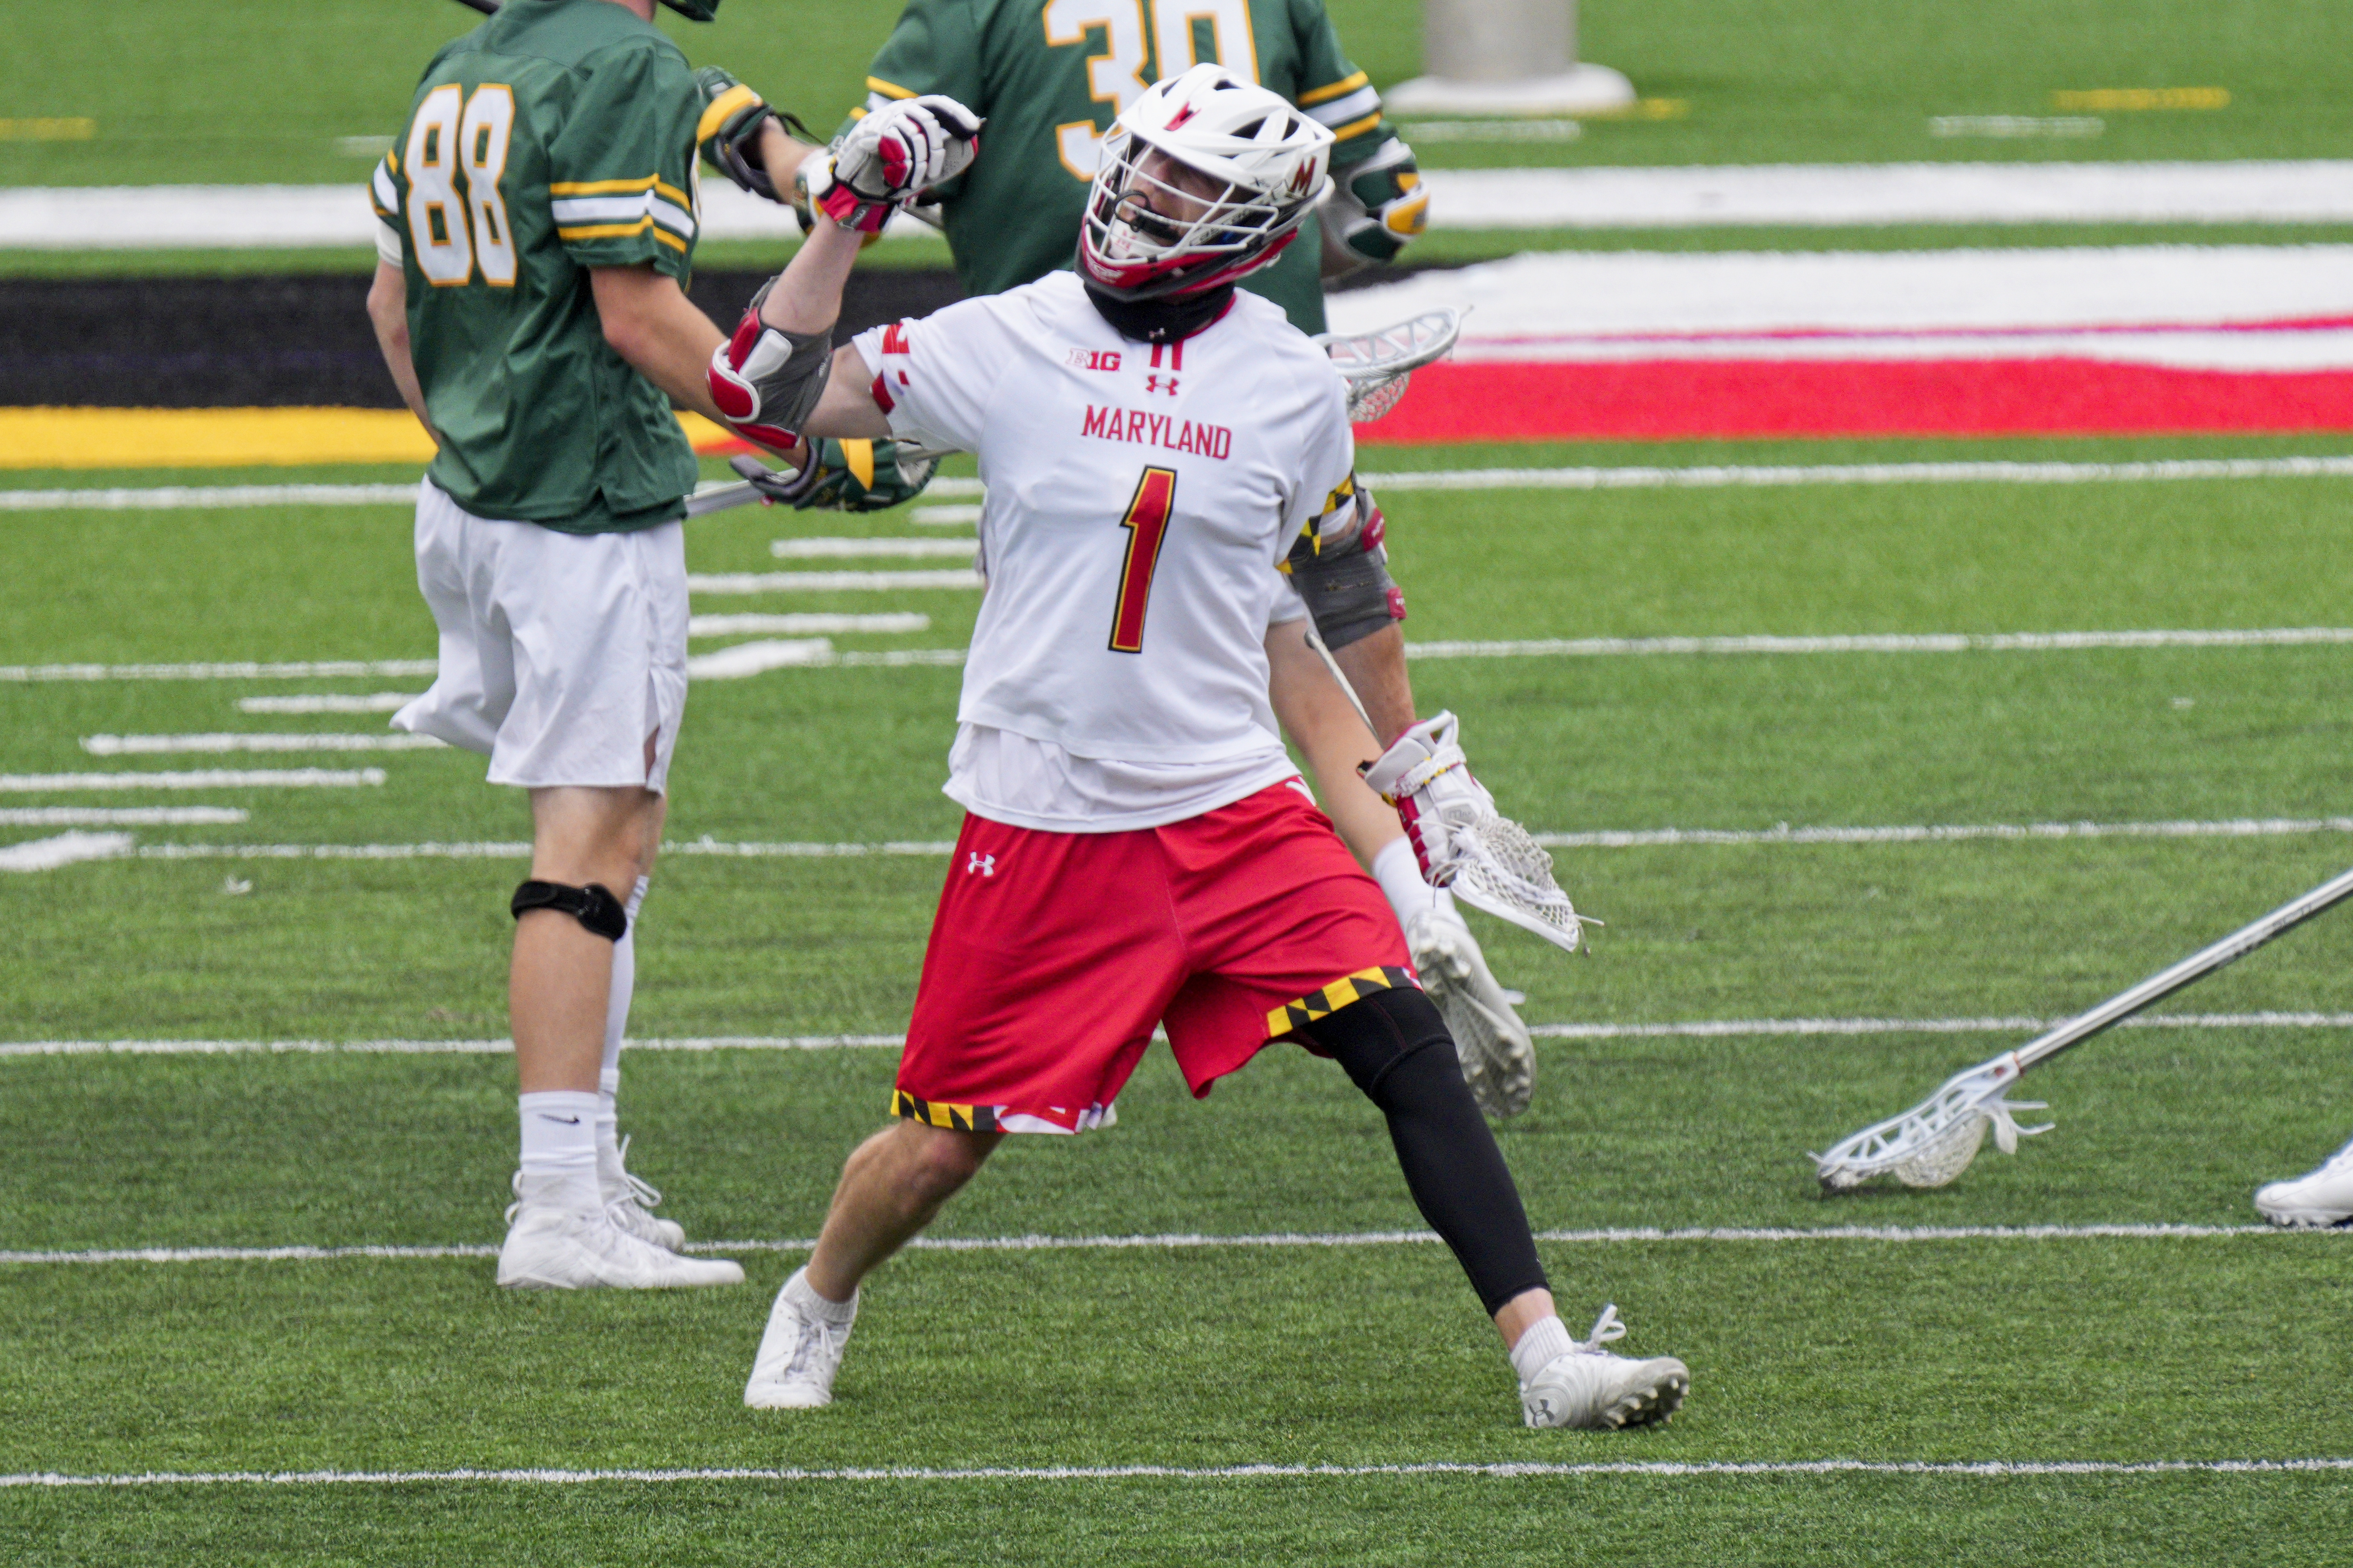 NCAA LACROSSE: MAY 15 Men’s Tournament - Vermont at Maryland